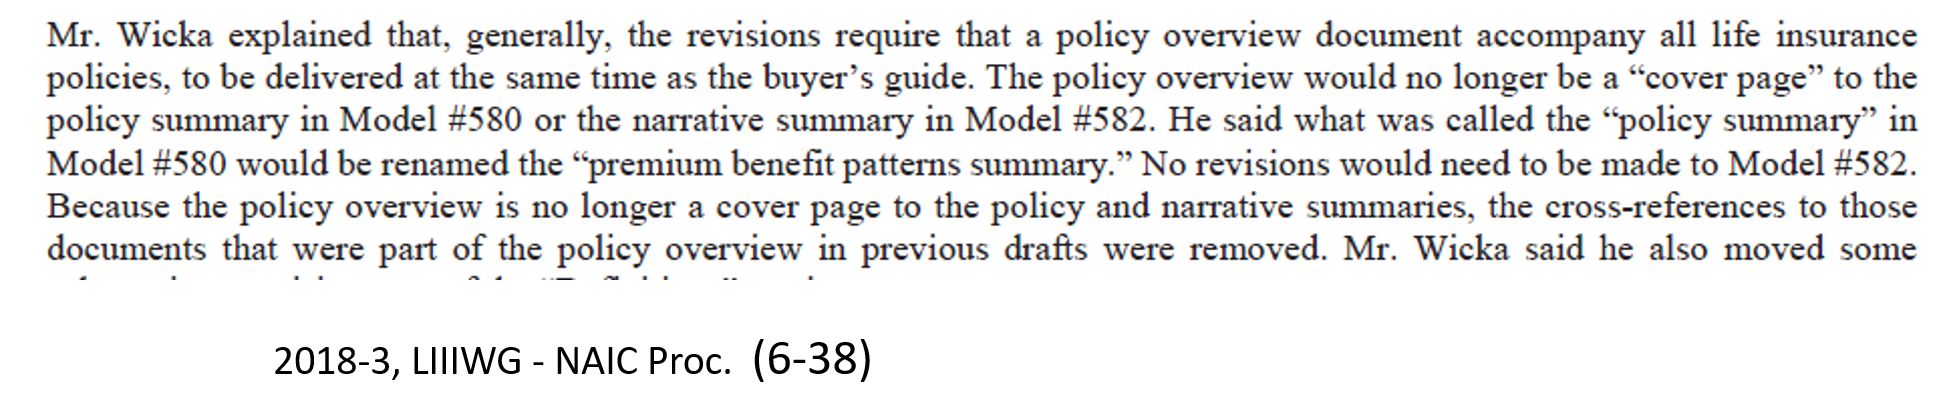 2018-3, LIIIWG - NAIC Proc. (6-38) policy summary no longer Cover Page